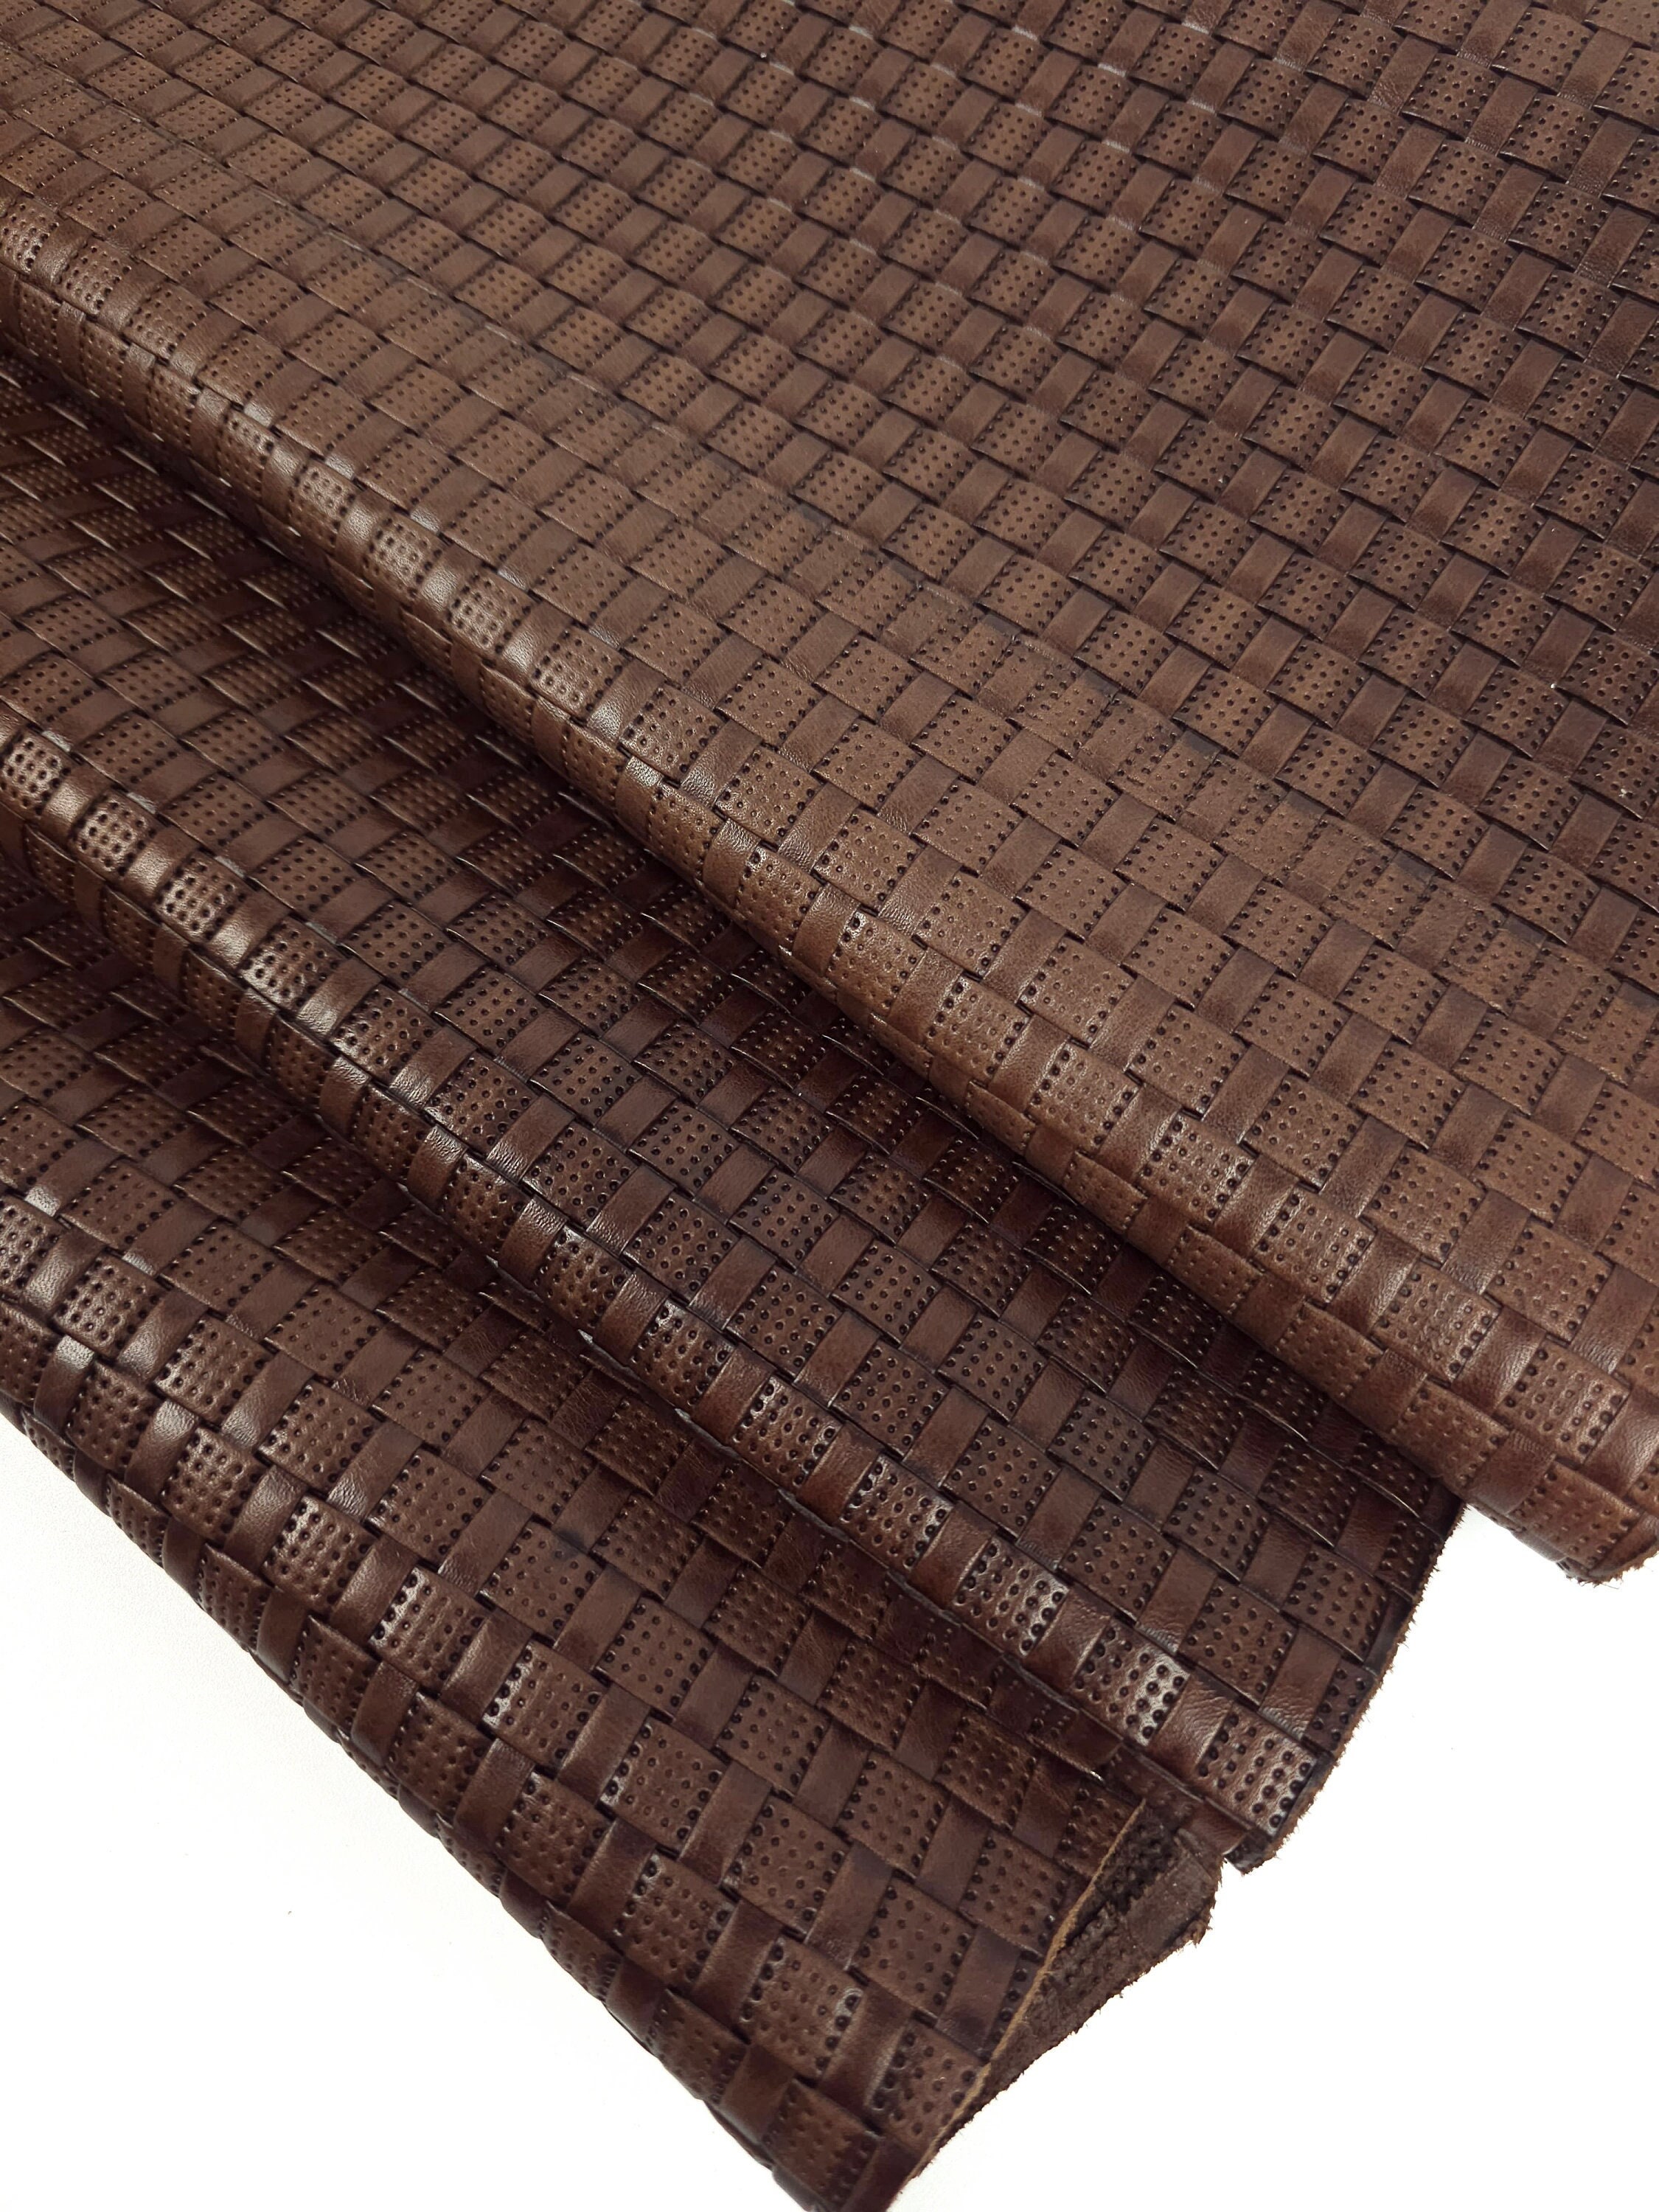 Brown Lambskin Leather With Pebbled Texture 0.46-0.9m2/5-9sqft Italian  0.8mm/2oz